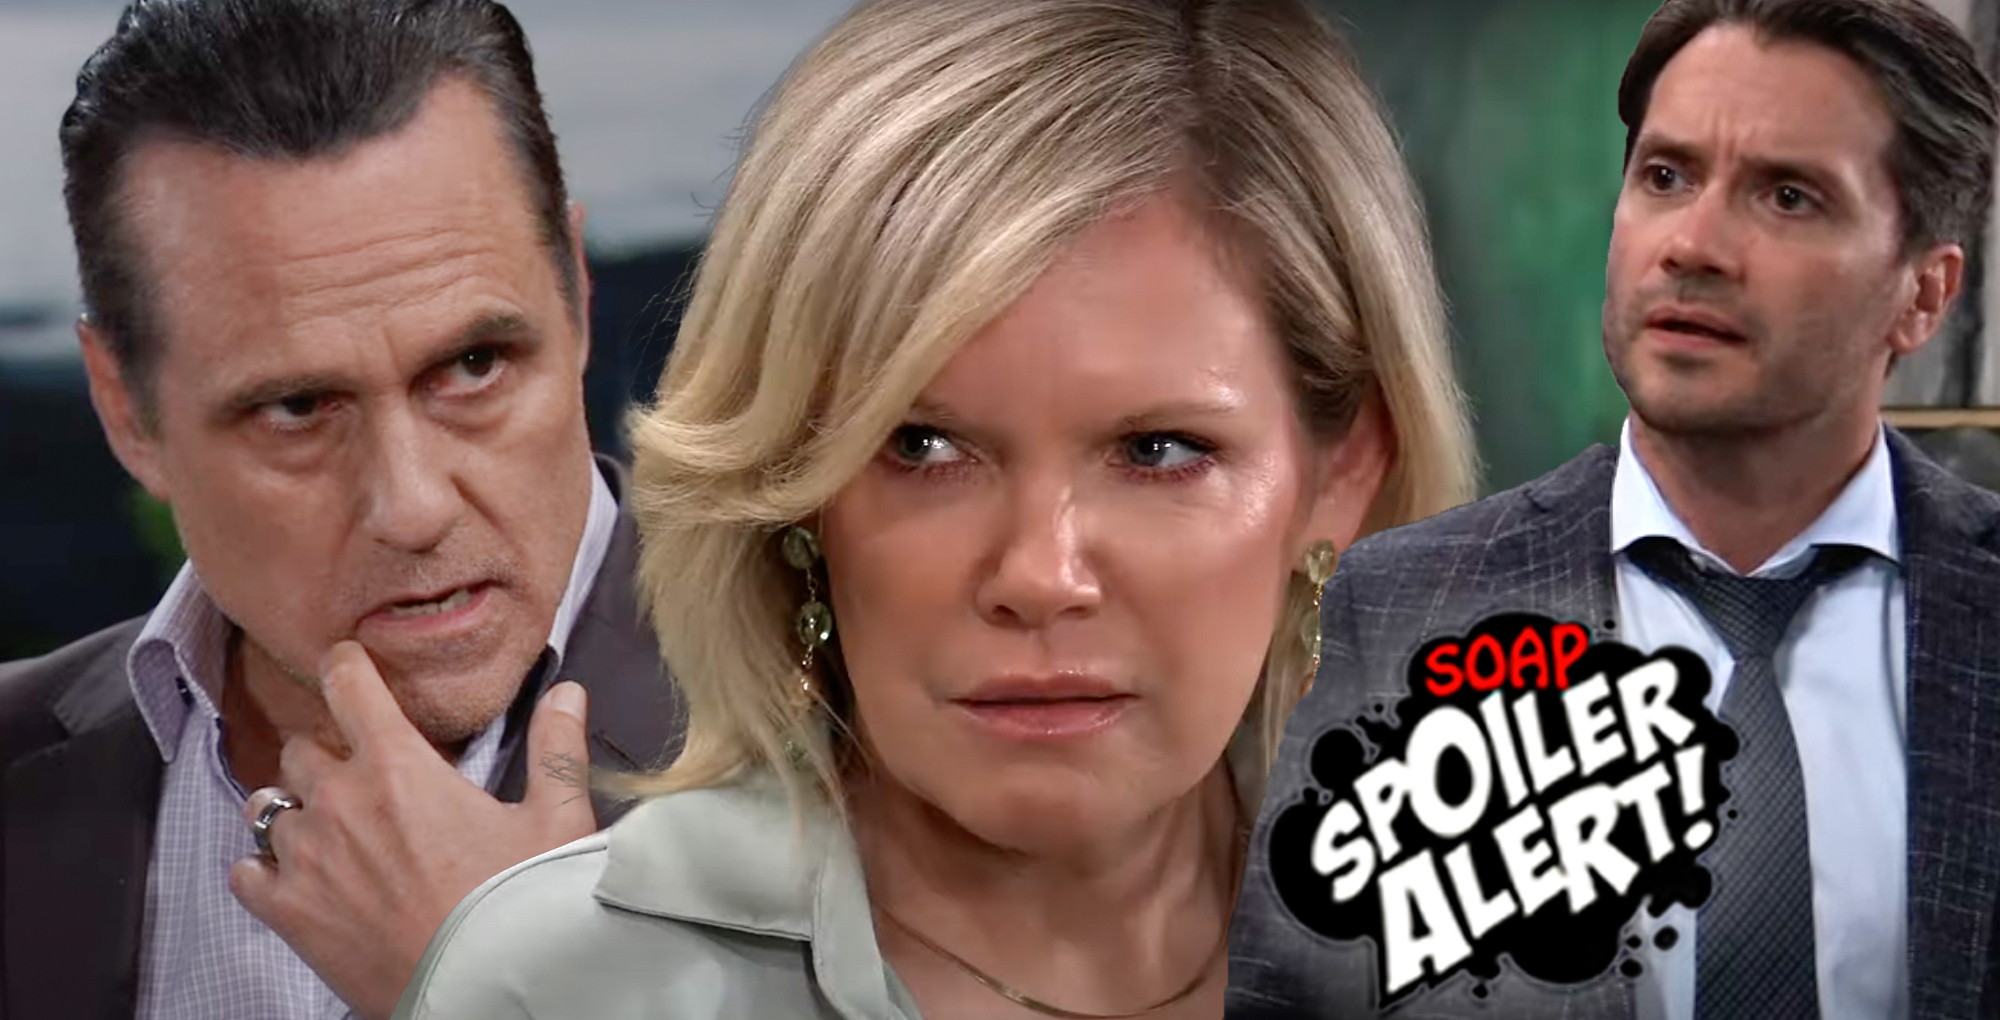 gh spoilers video collage of sonny, ava, and dante.